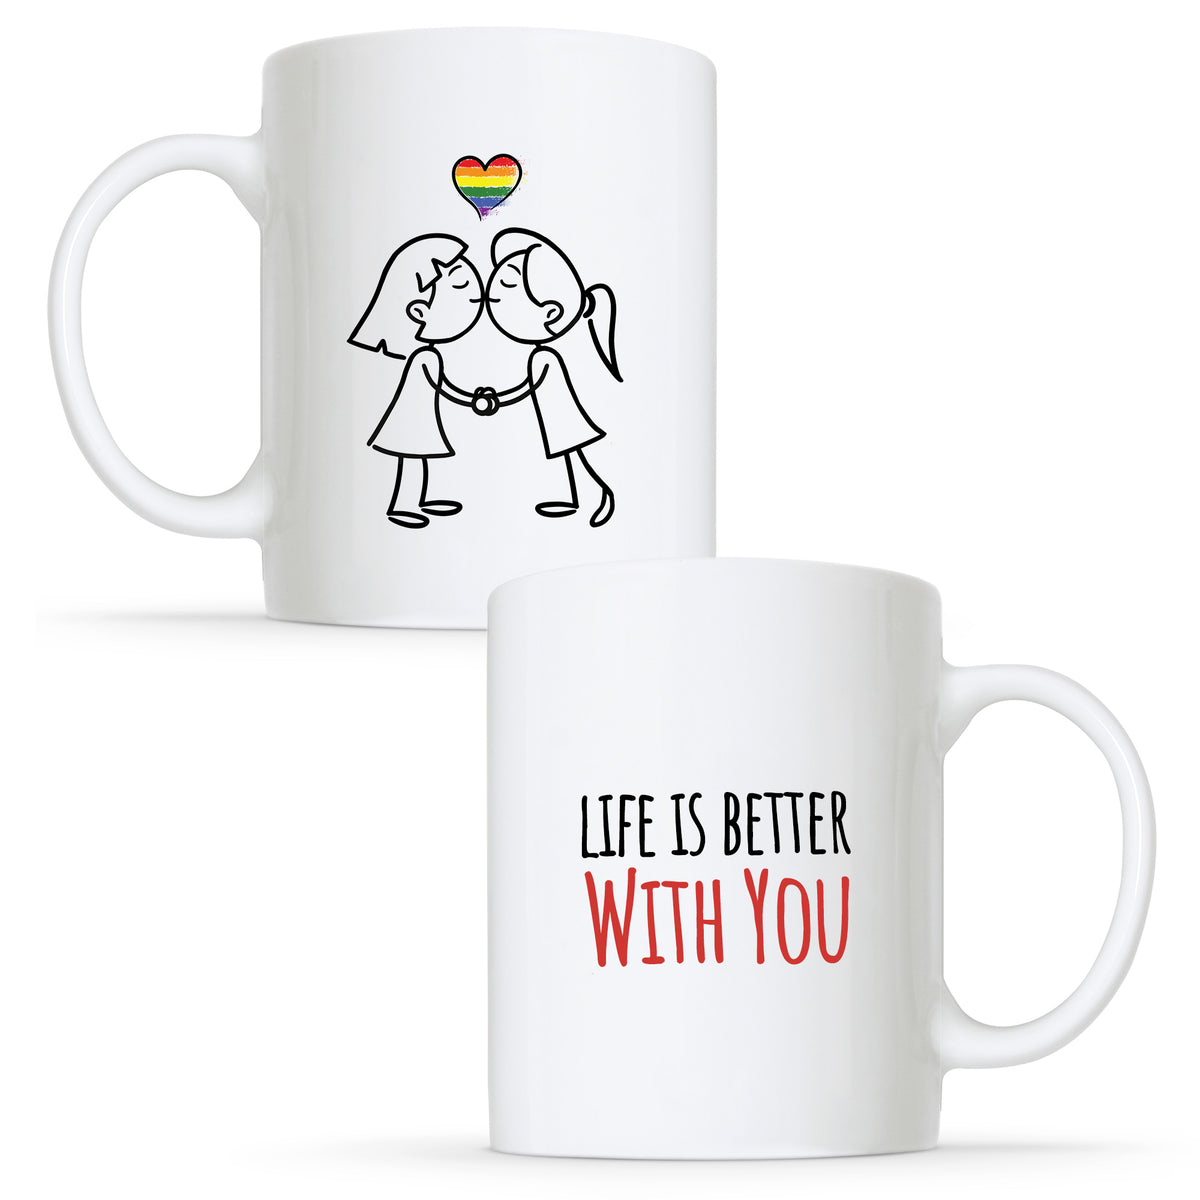 Life is Better with you - Lesbian Gay Couple Mug Set | Gift